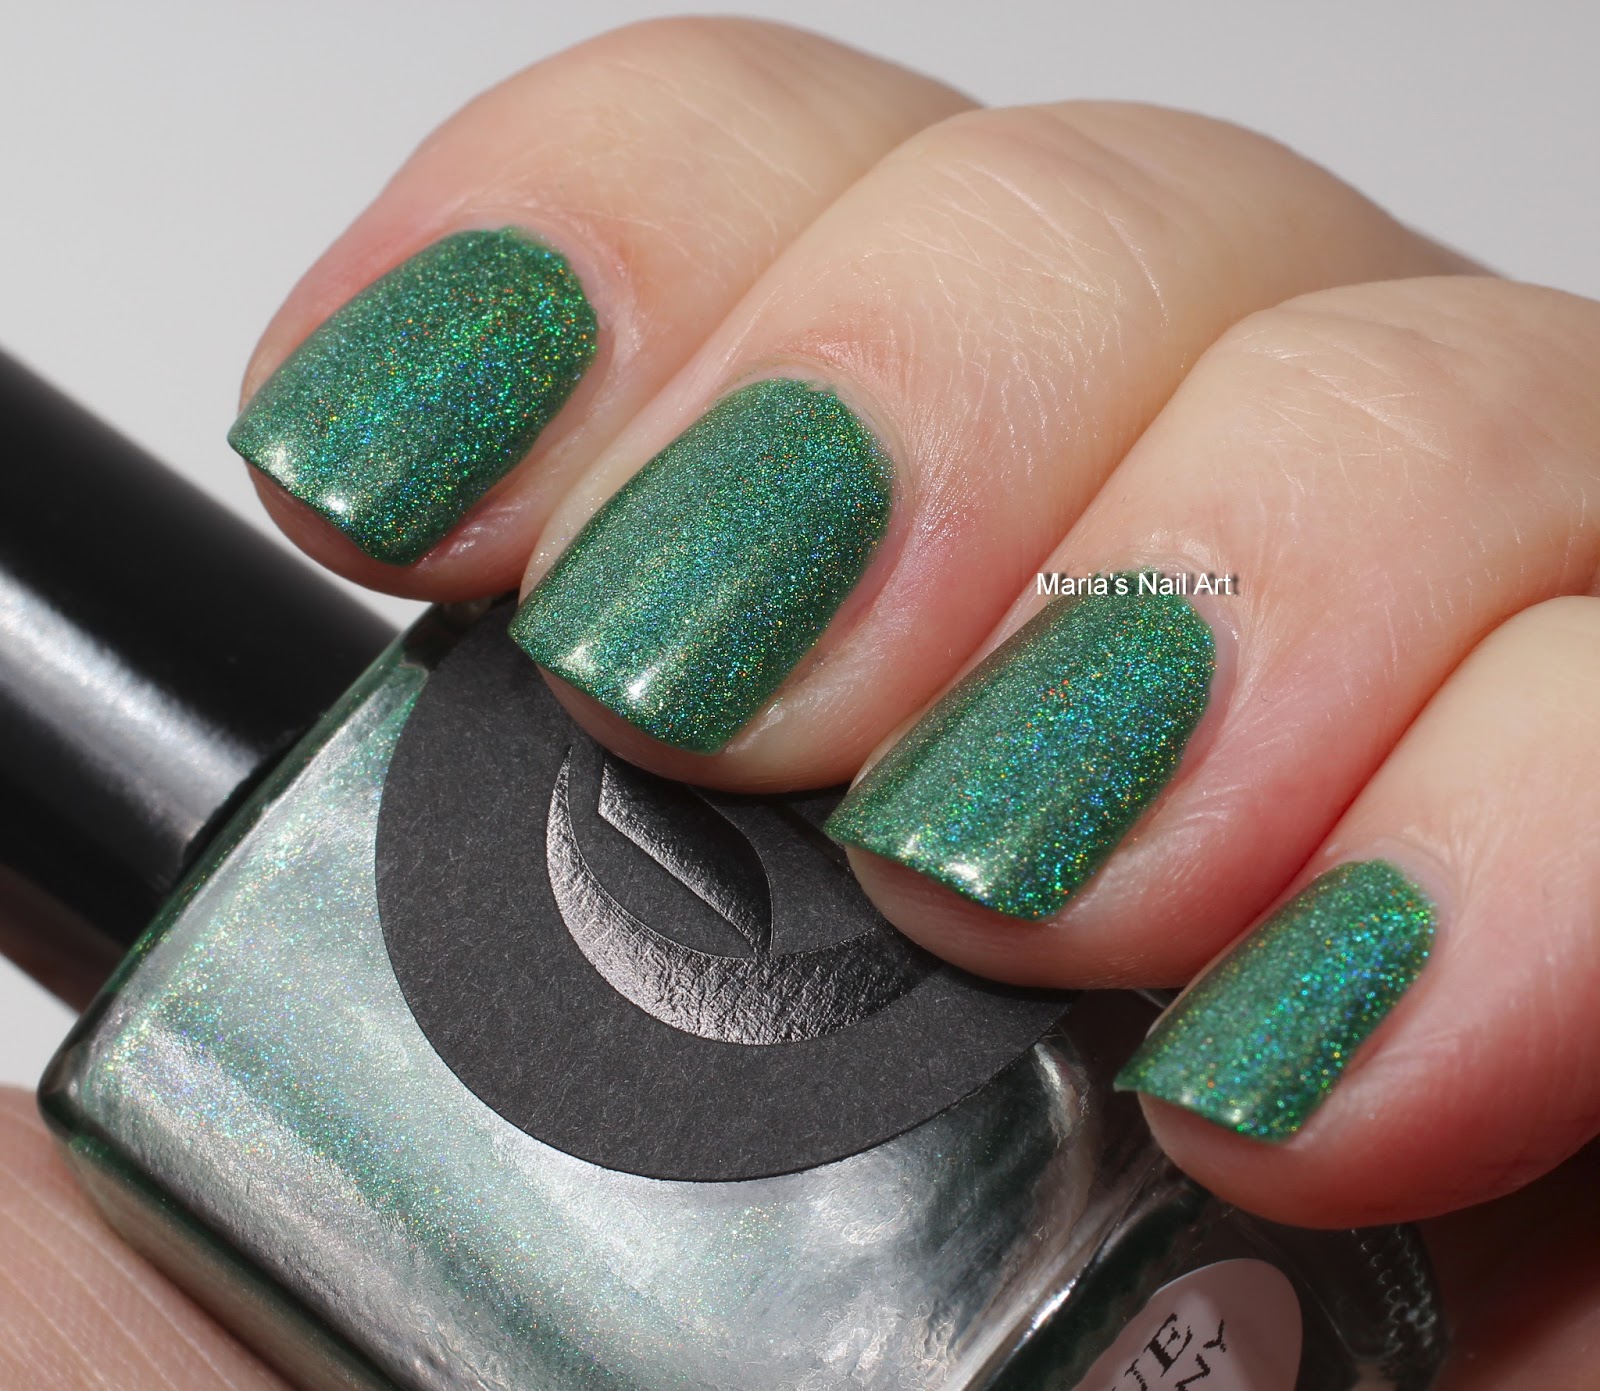 Marias Nail Art and Polish Blog: Cirque Lonesome George - swatches & review